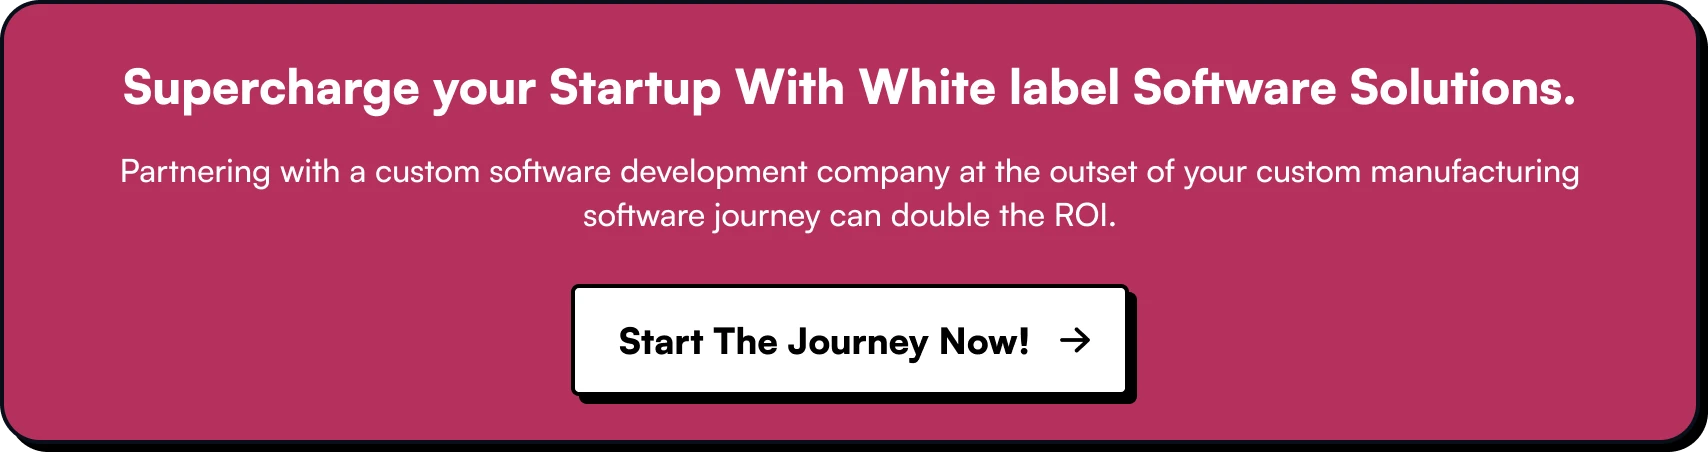 Supercharge your Startup With White label Software Solutions